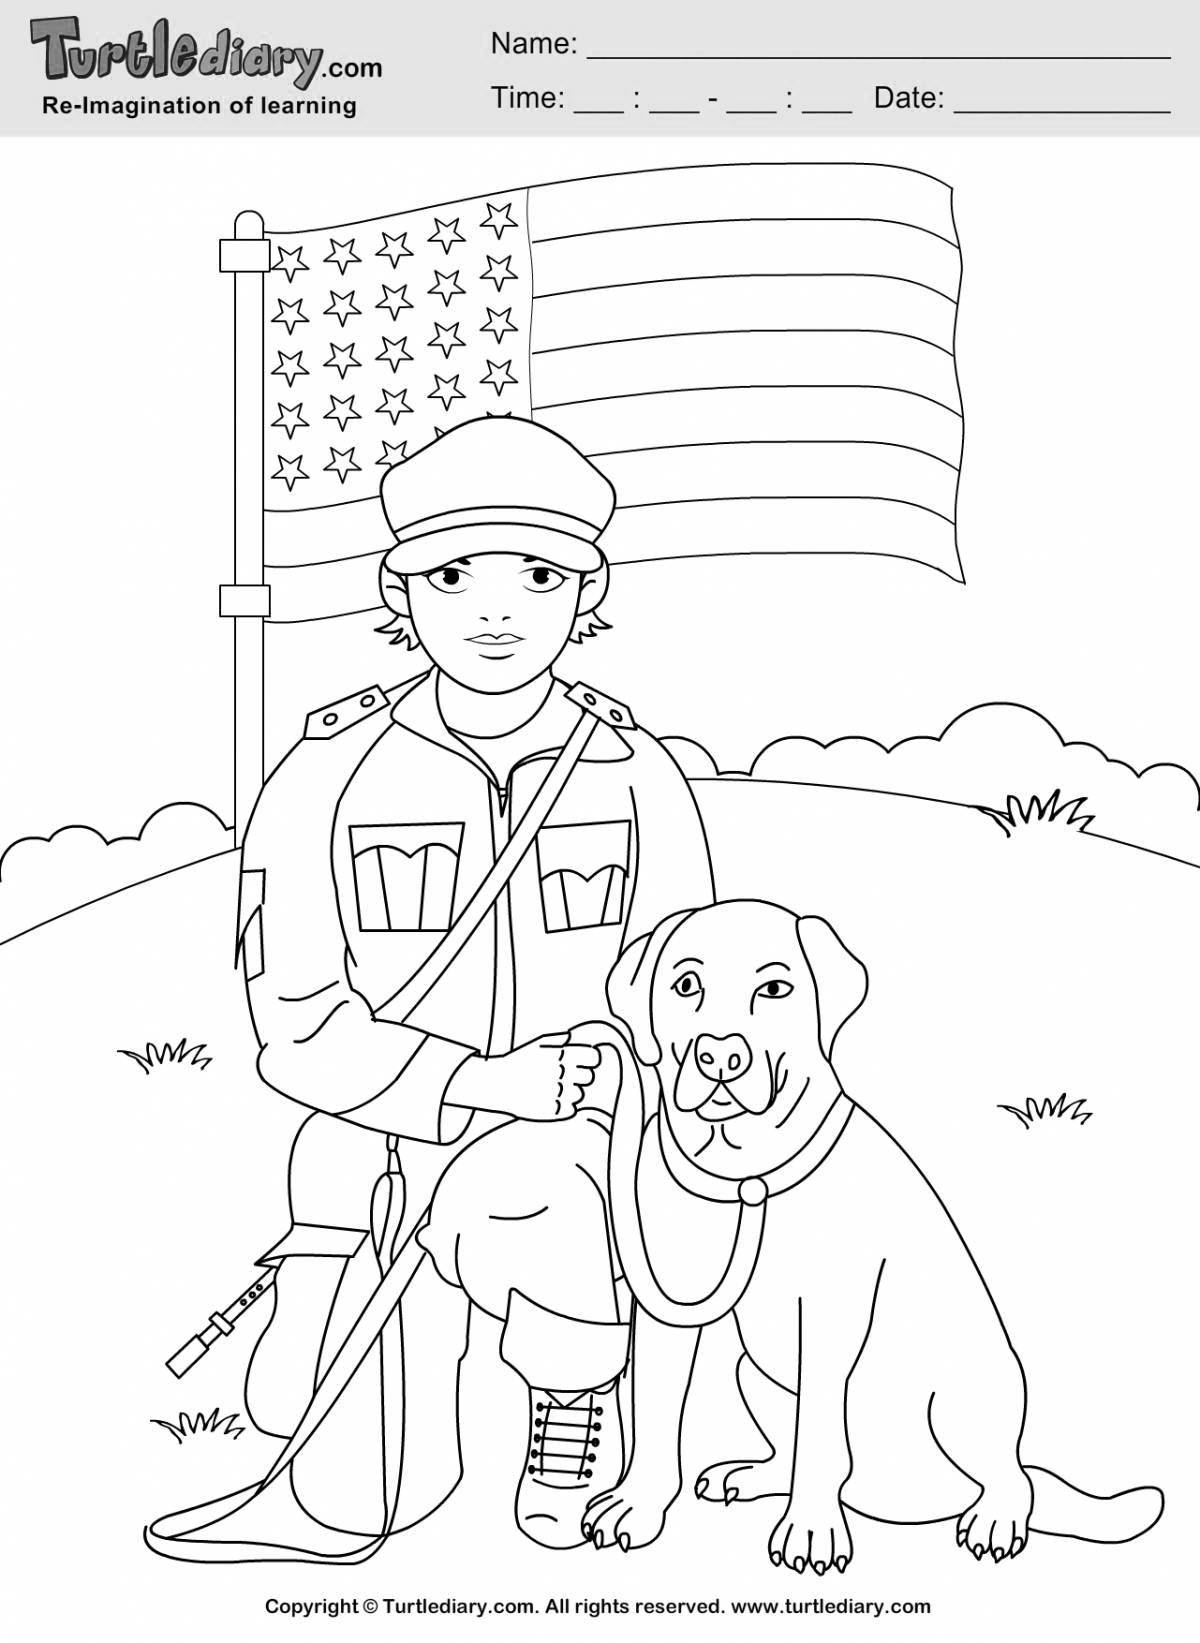 Cheerful border guard with a dog for children